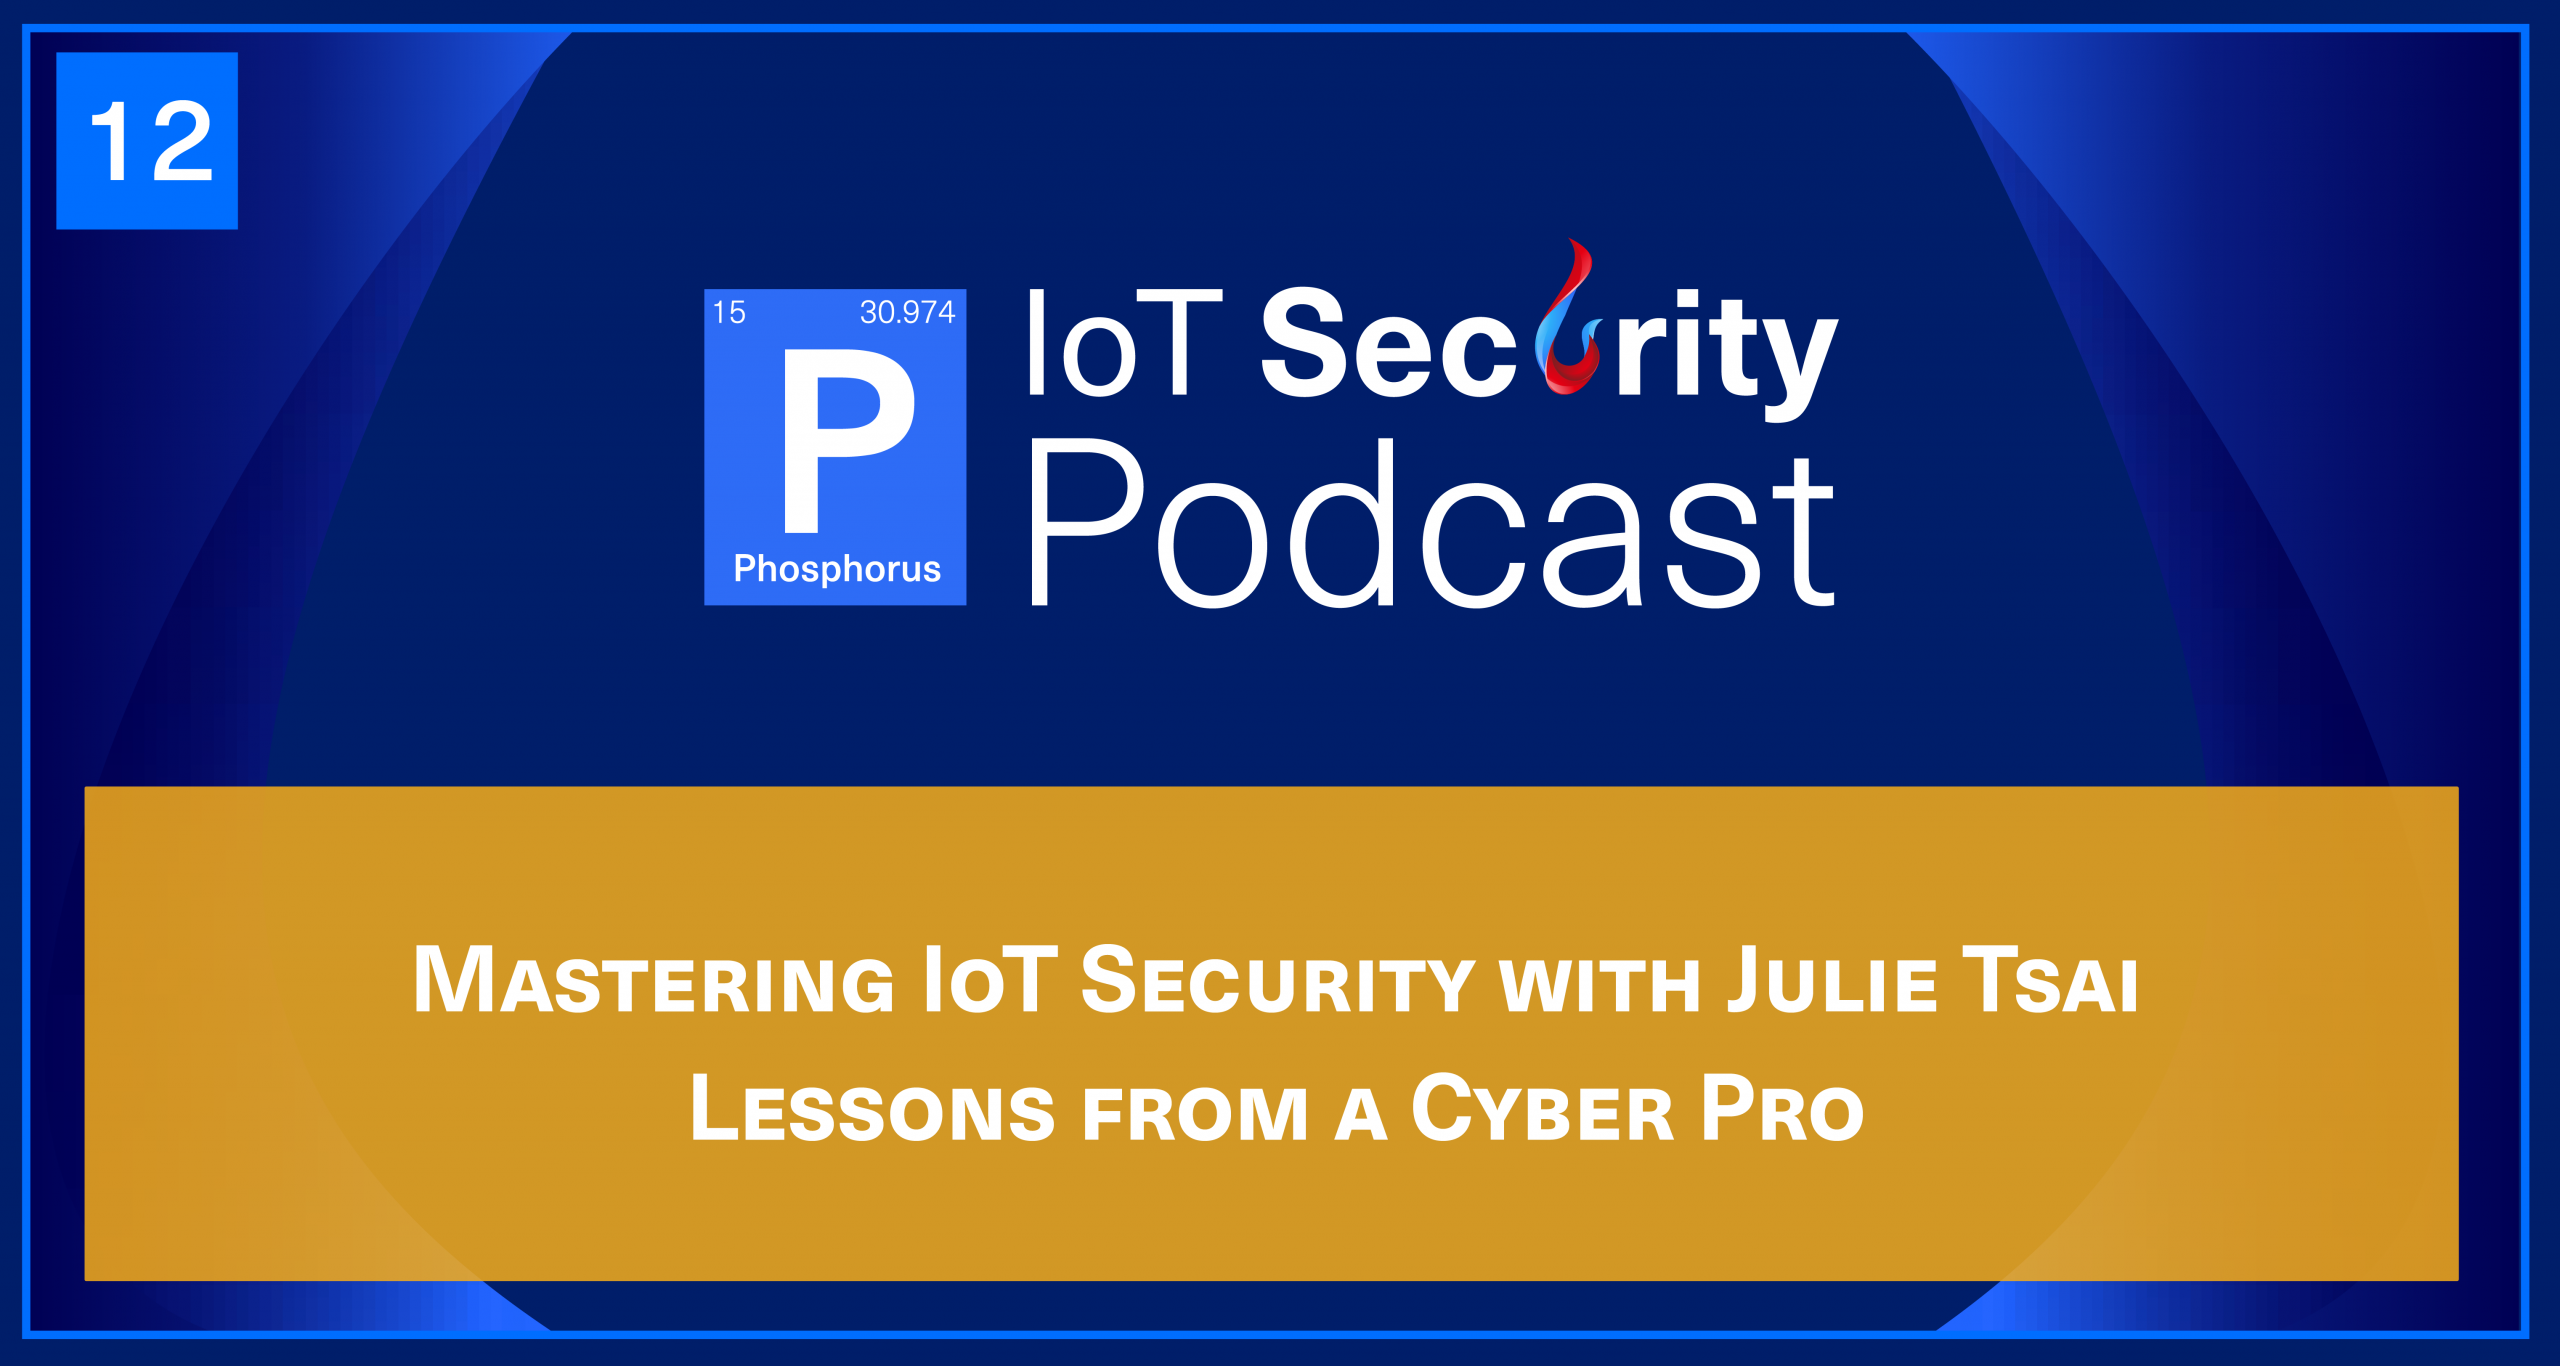 Mastering IoT Security with Julie Tsai: Lessons from a Cyber Pro